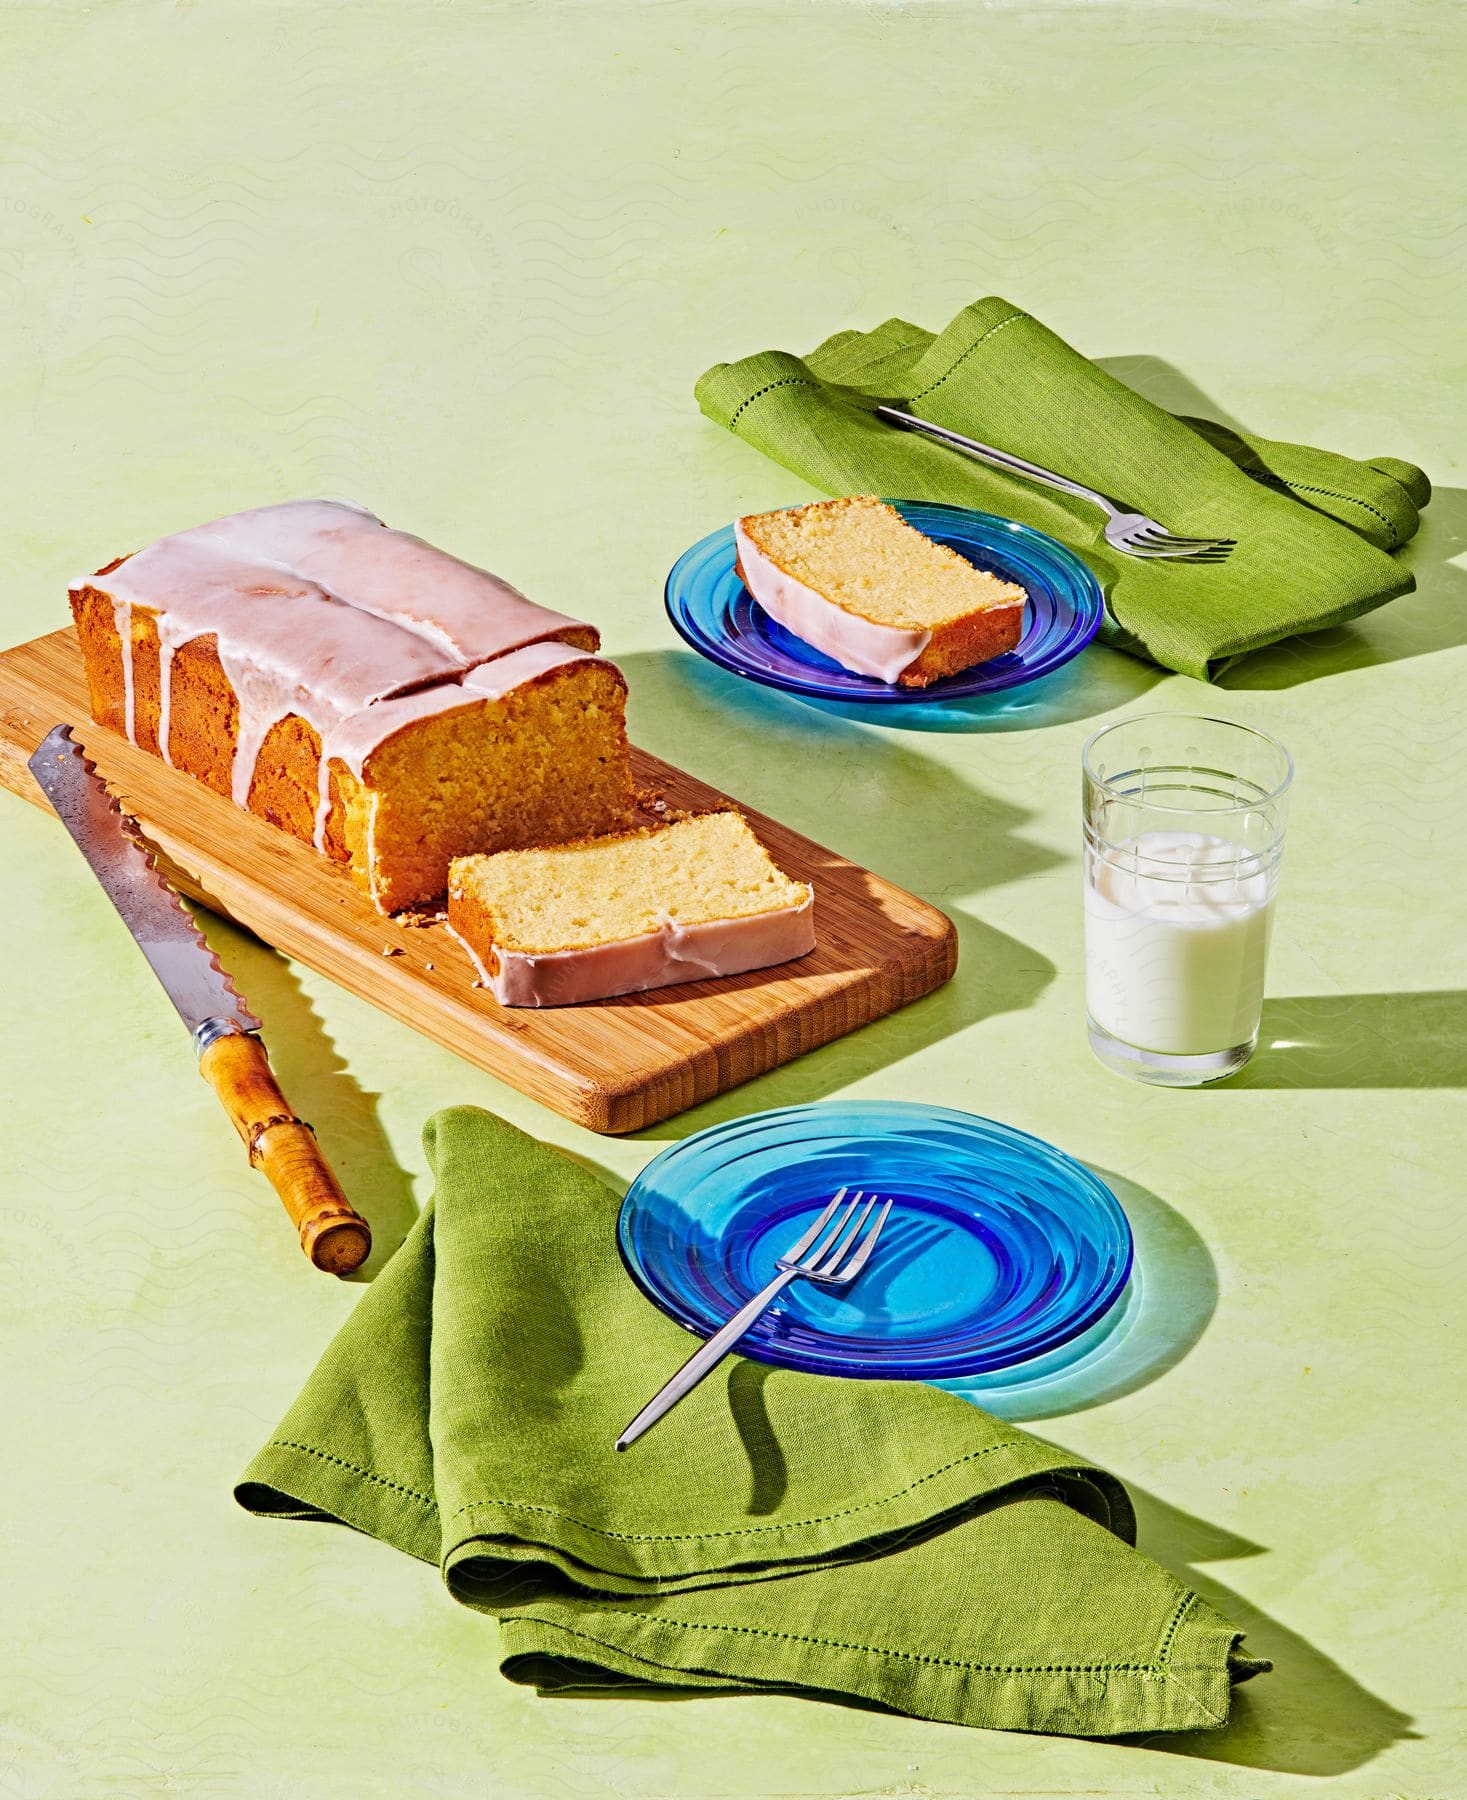 Cake on wooden surface with slice on blue plate green cloth knife and fork